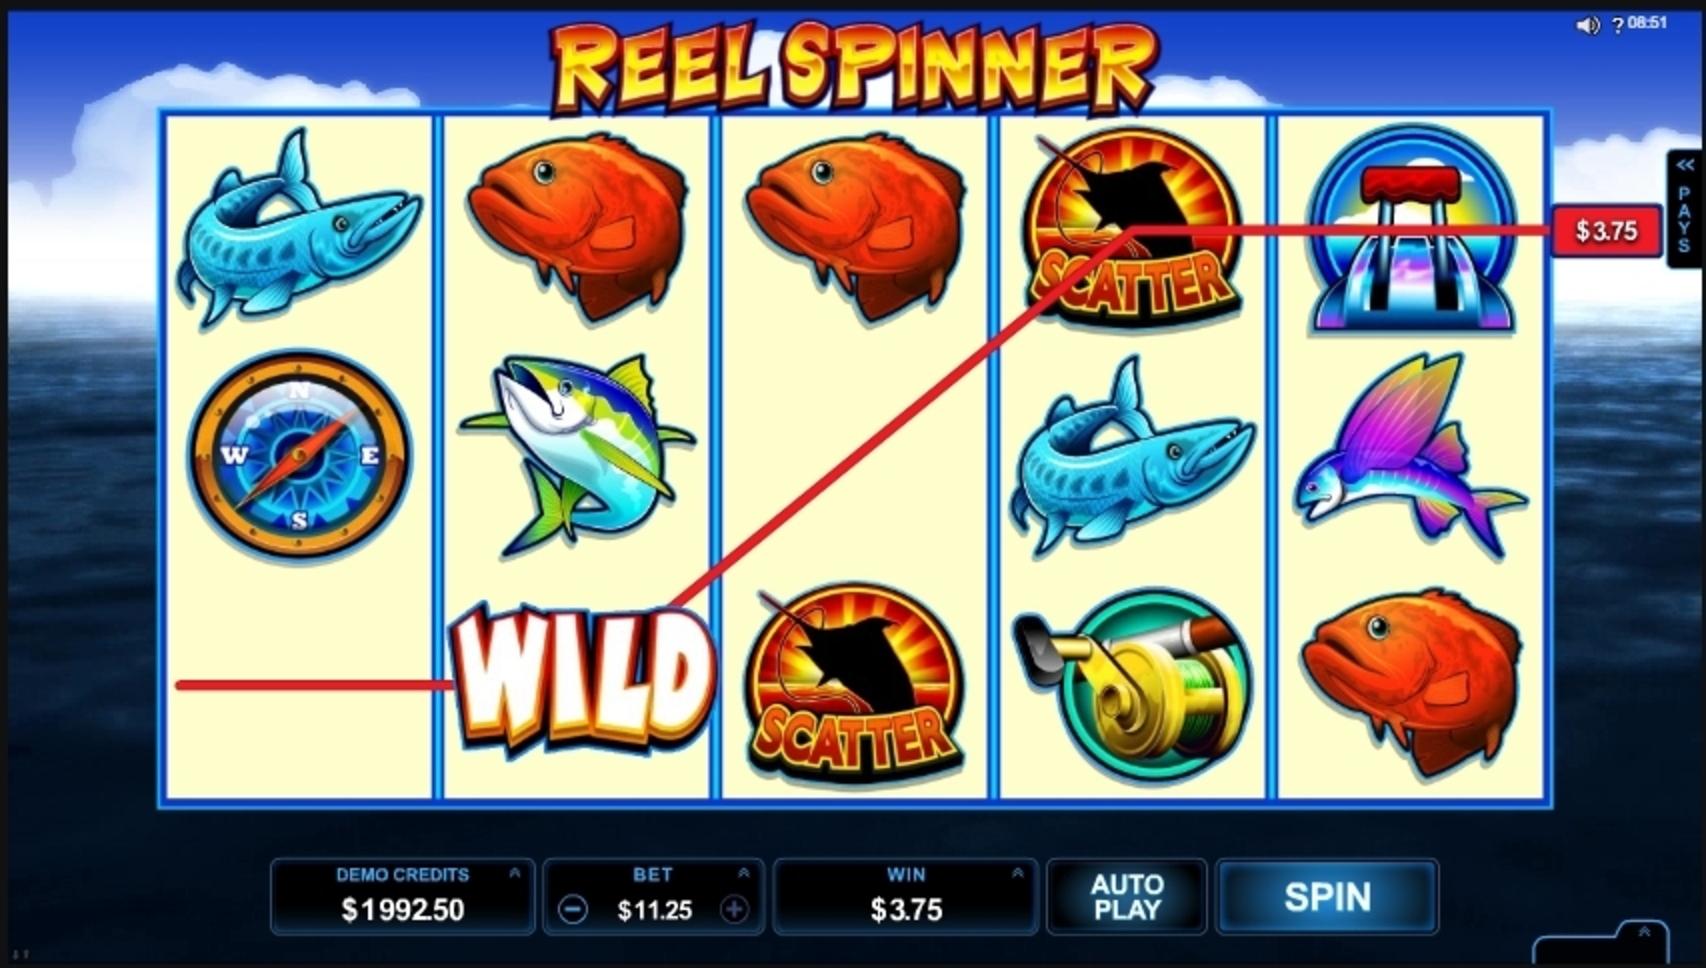 Win Money in Reel Spinner Free Slot Game by Microgaming